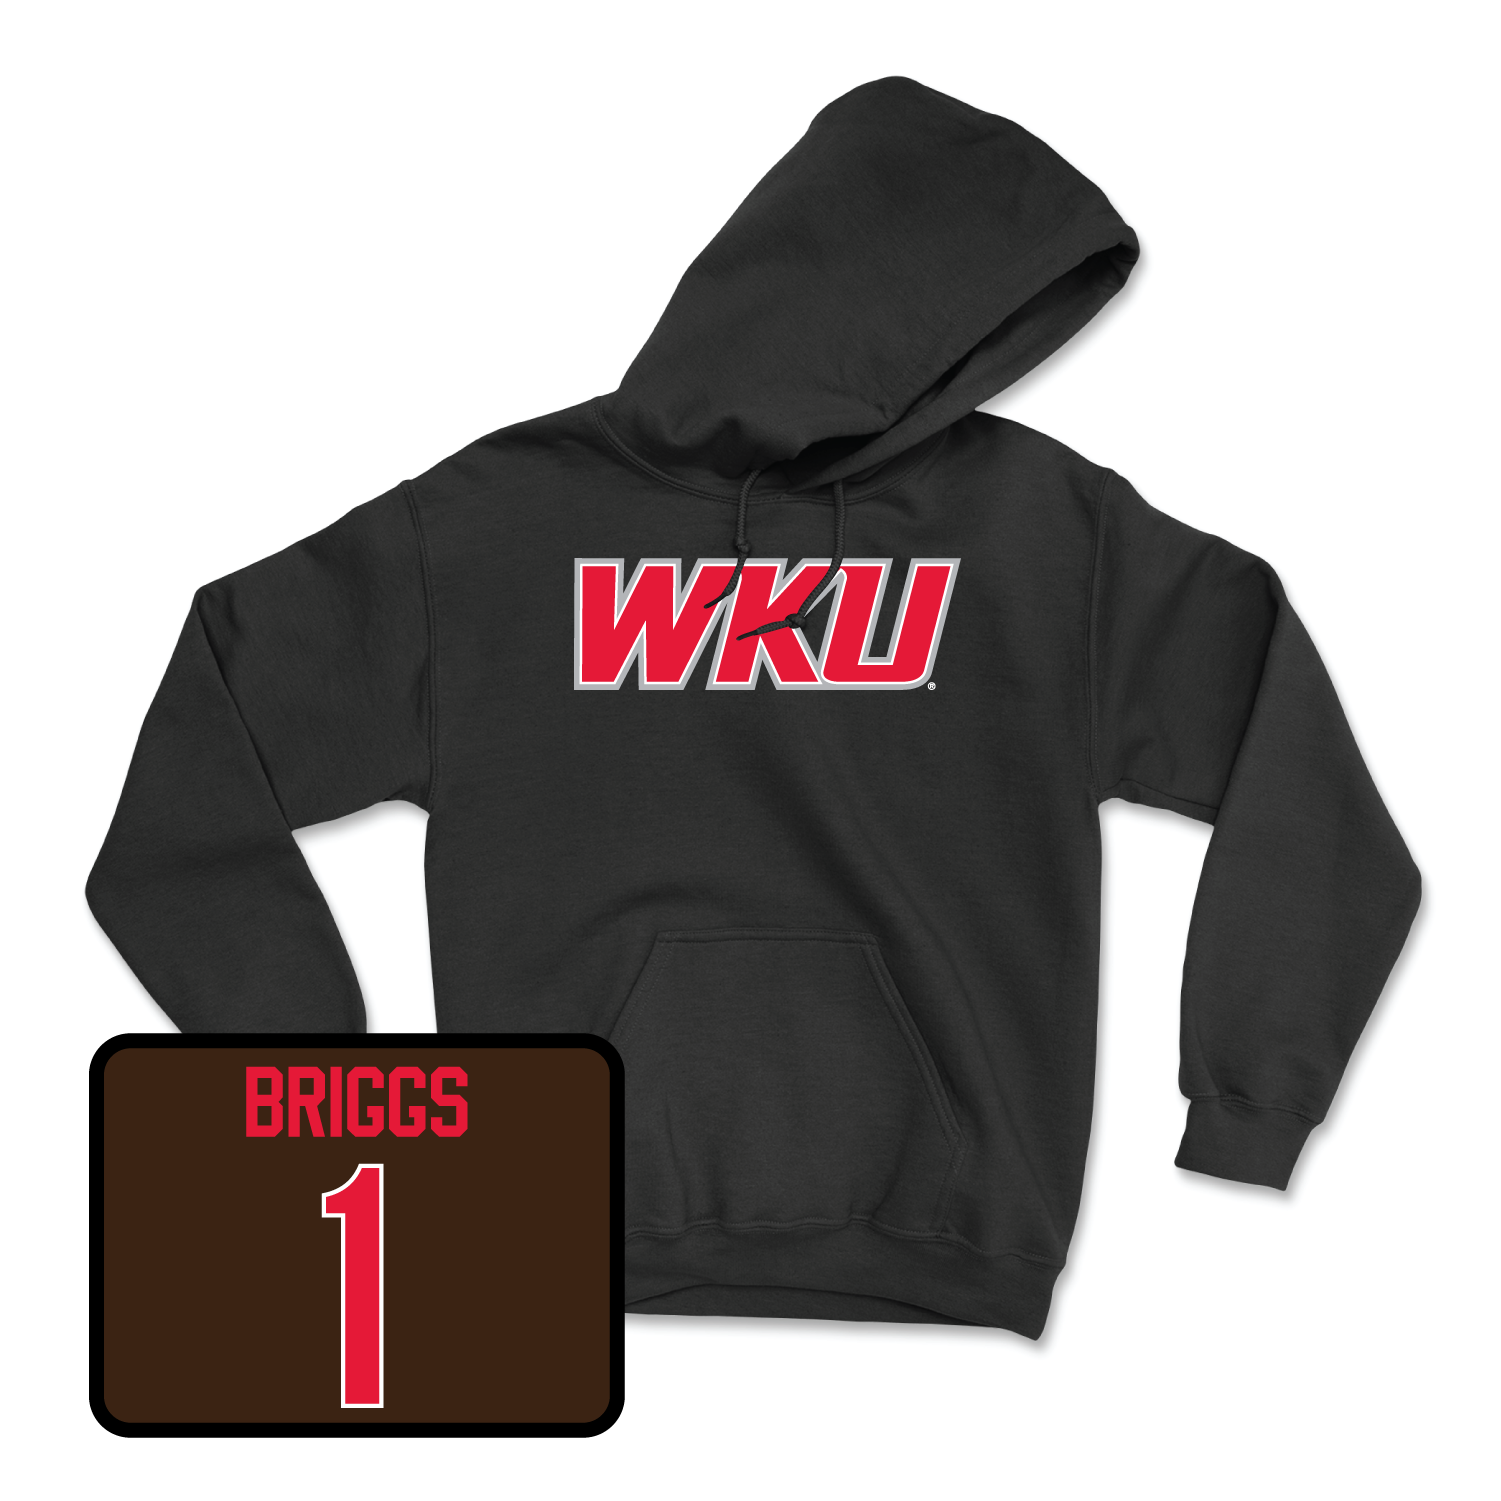 Black Women's Volleyball WKU Hoodie Youth Large / Paige Briggs | #1